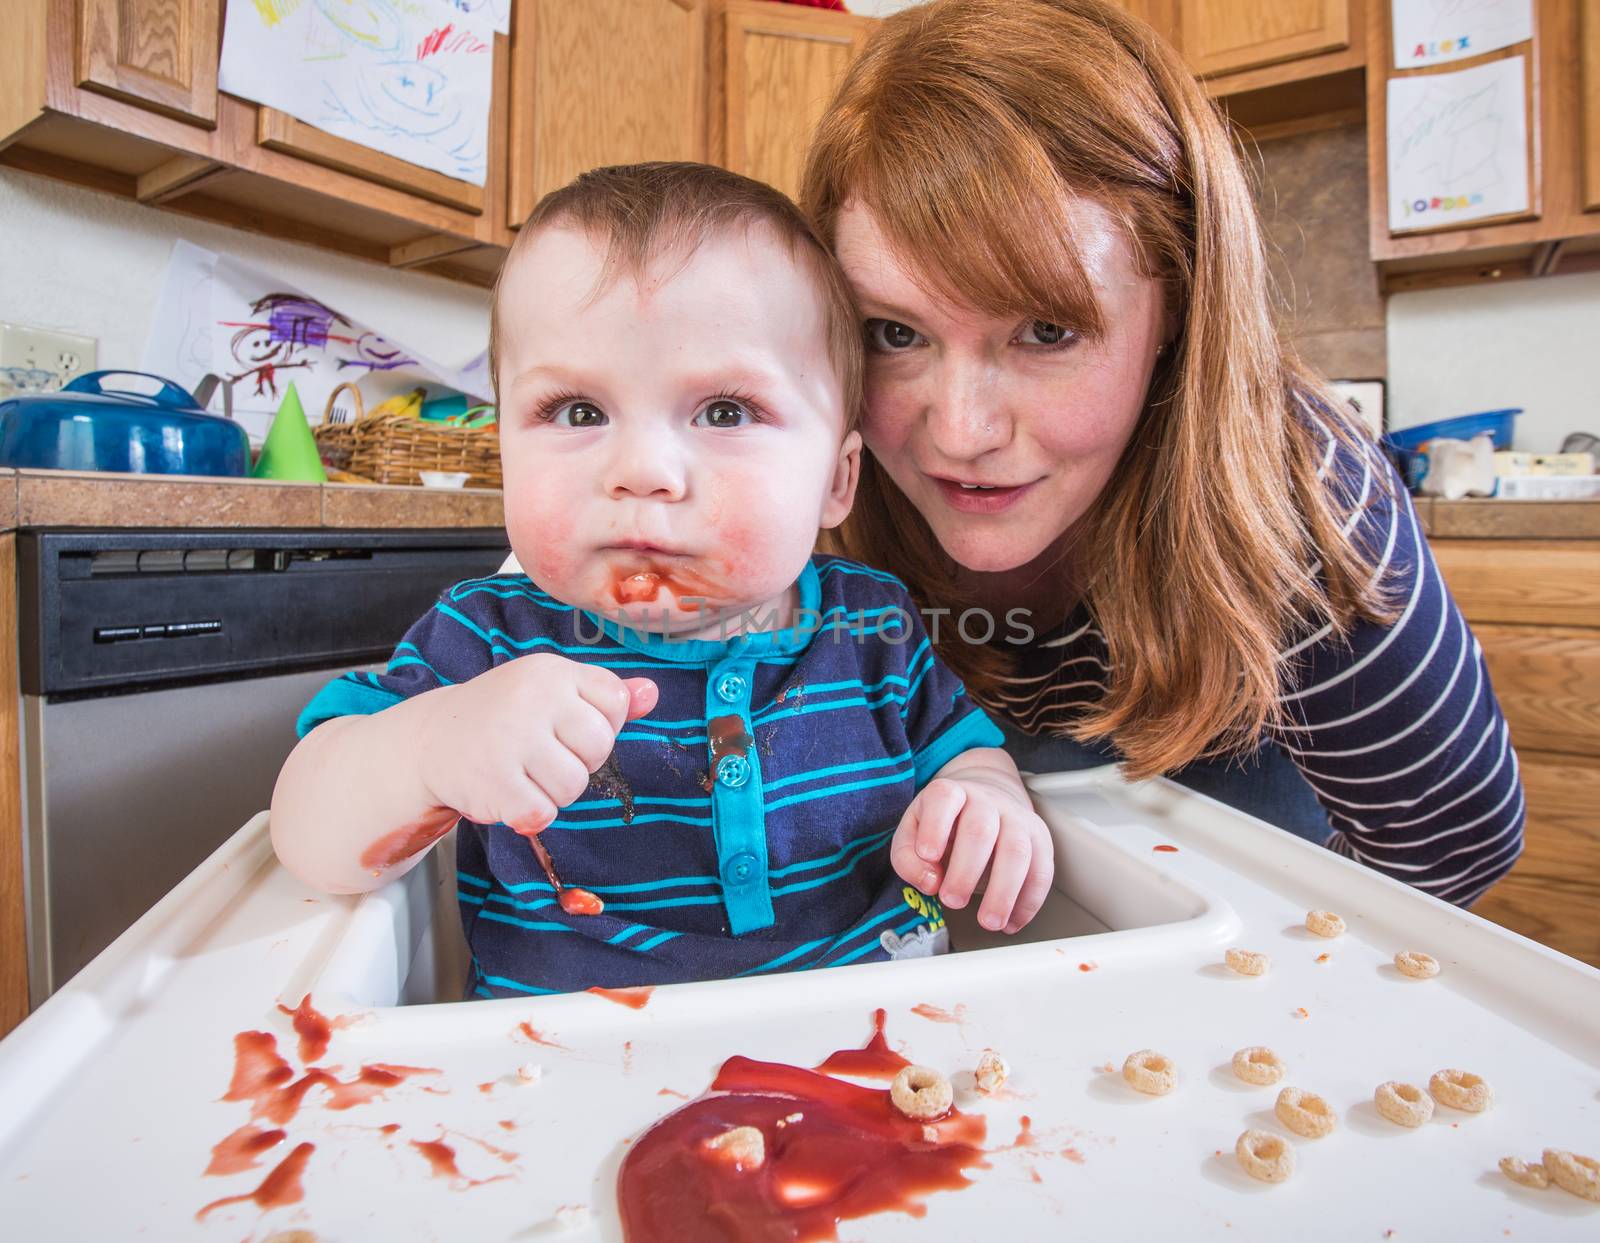 A woman feeds her baby breakfast in the kitchen